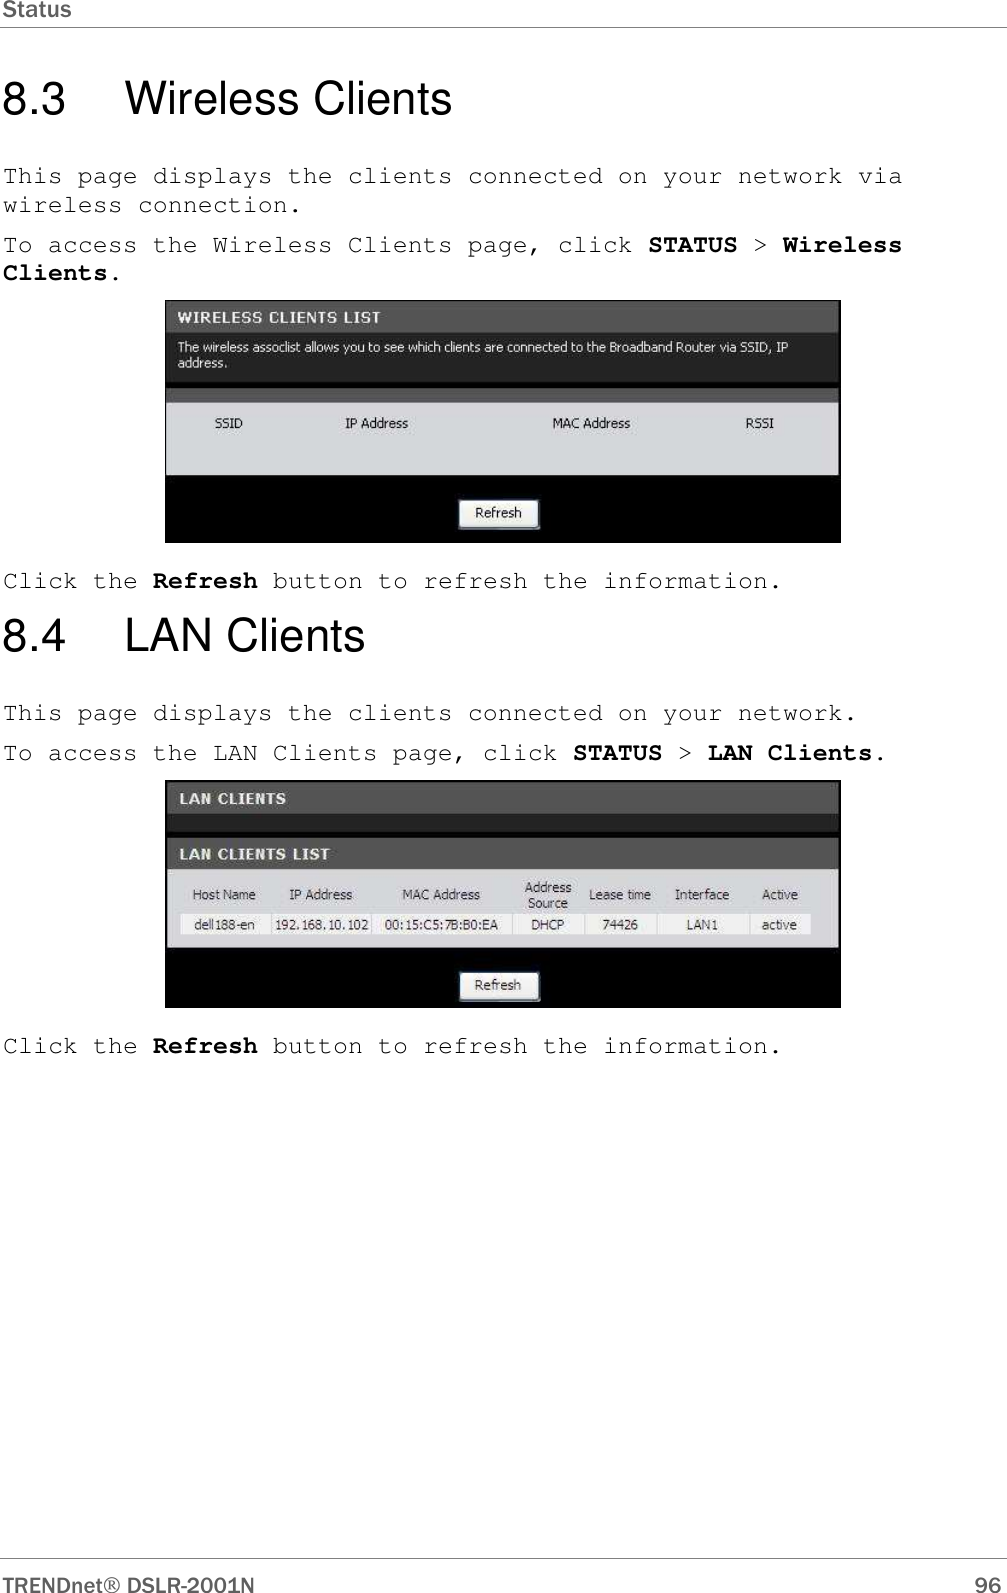 Status      TRENDnet DSLR-2001N        96 8.3  Wireless Clients This page displays the clients connected on your network via wireless connection. To access the Wireless Clients page, click STATUS &gt; Wireless Clients.  Click the Refresh button to refresh the information. 8.4  LAN Clients This page displays the clients connected on your network. To access the LAN Clients page, click STATUS &gt; LAN Clients.  Click the Refresh button to refresh the information. 